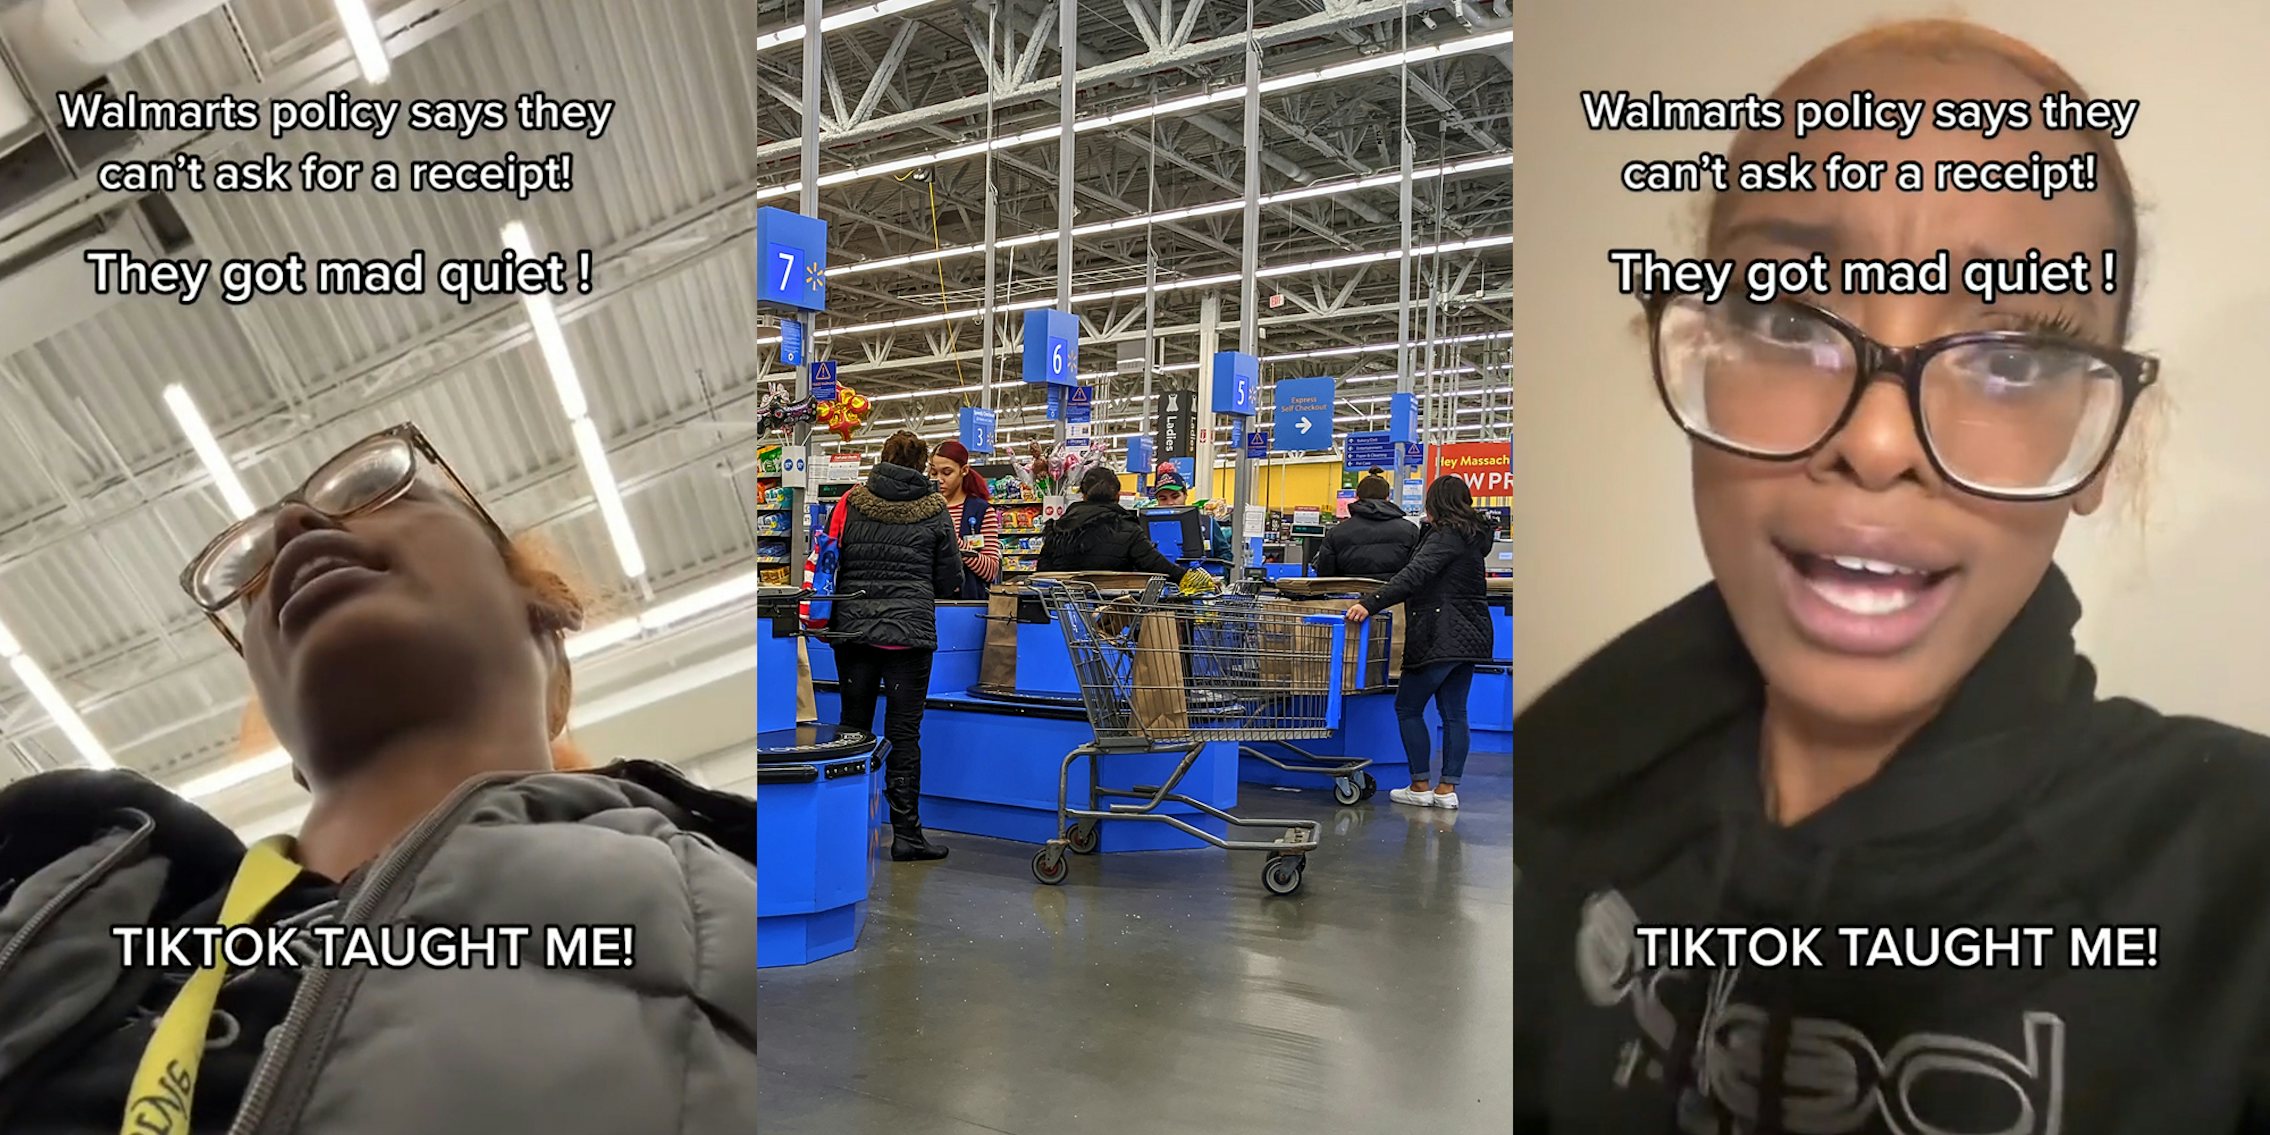 woman speaking in Walmart with caption 'Walmarts policy says they can't ask for a receipt! They got mad quiet! TIKTOK TAUGHT ME!' (l) Walmart checkout with workers and customers (c) woman speaking with caption 'Walmarts policy says they can't ask for a receipt! They got mad quiet! TIKTOK TAUGHT ME!' (r)